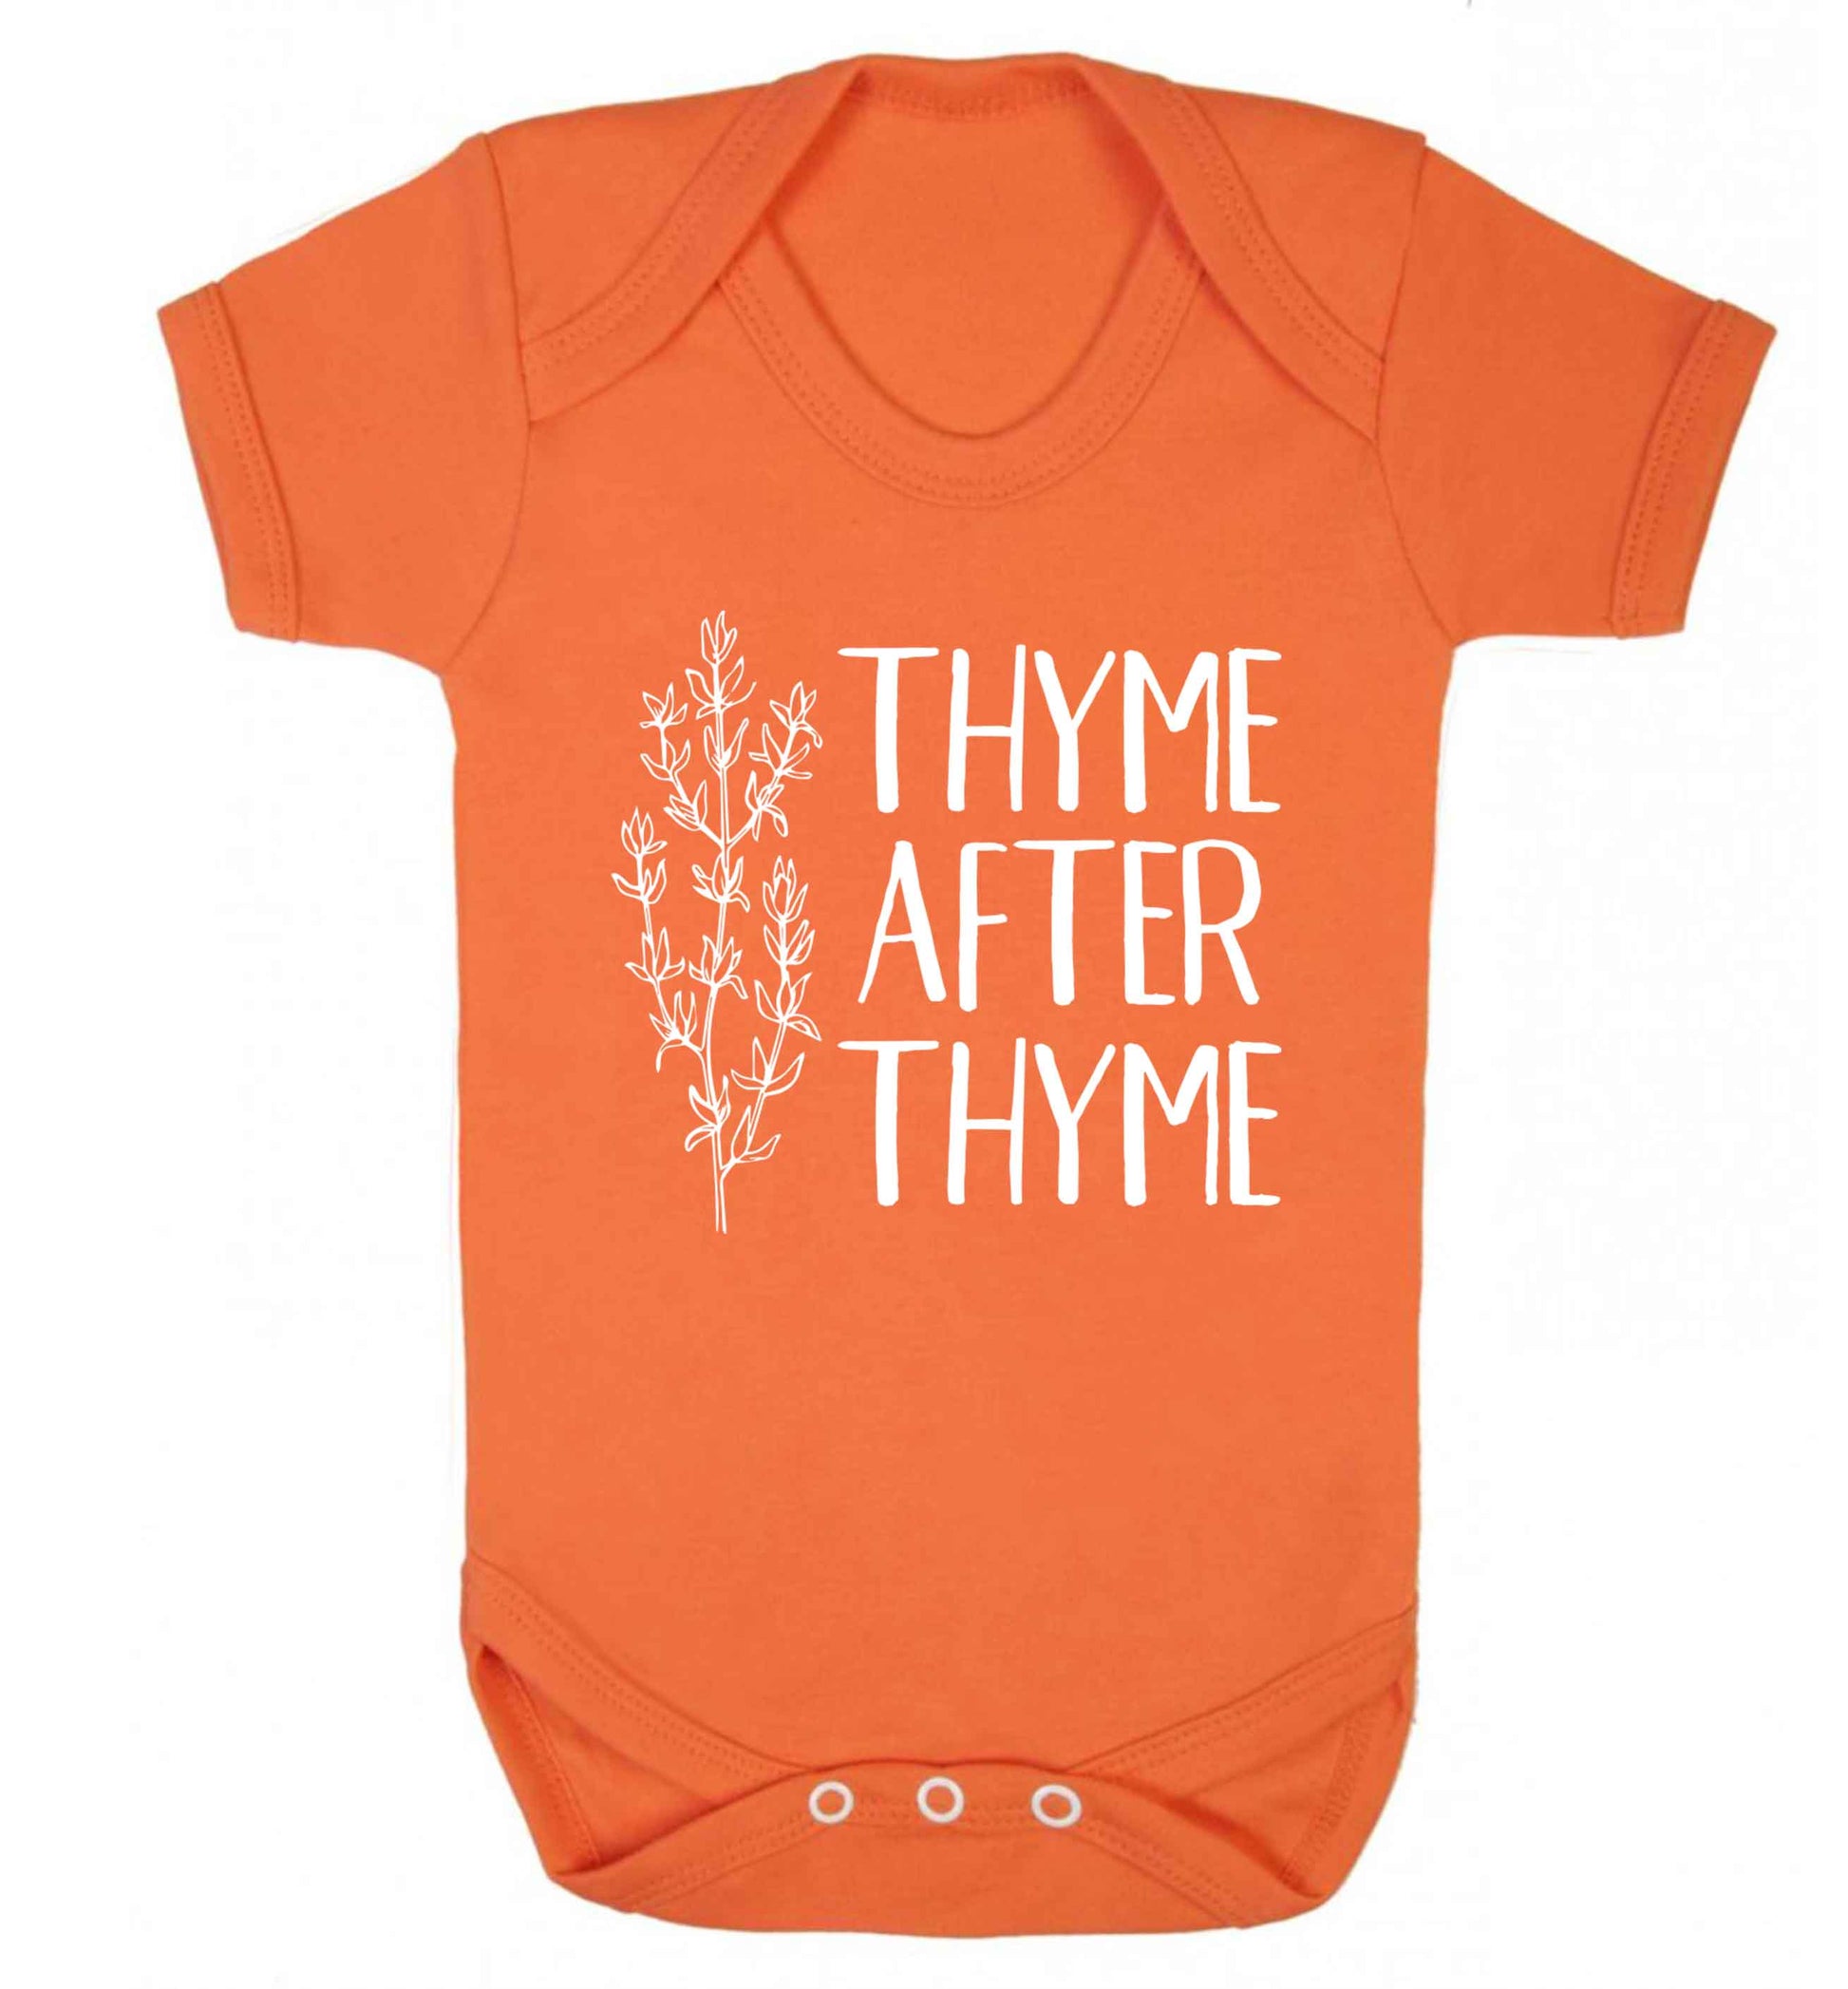 Thyme after thyme Baby Vest orange 18-24 months